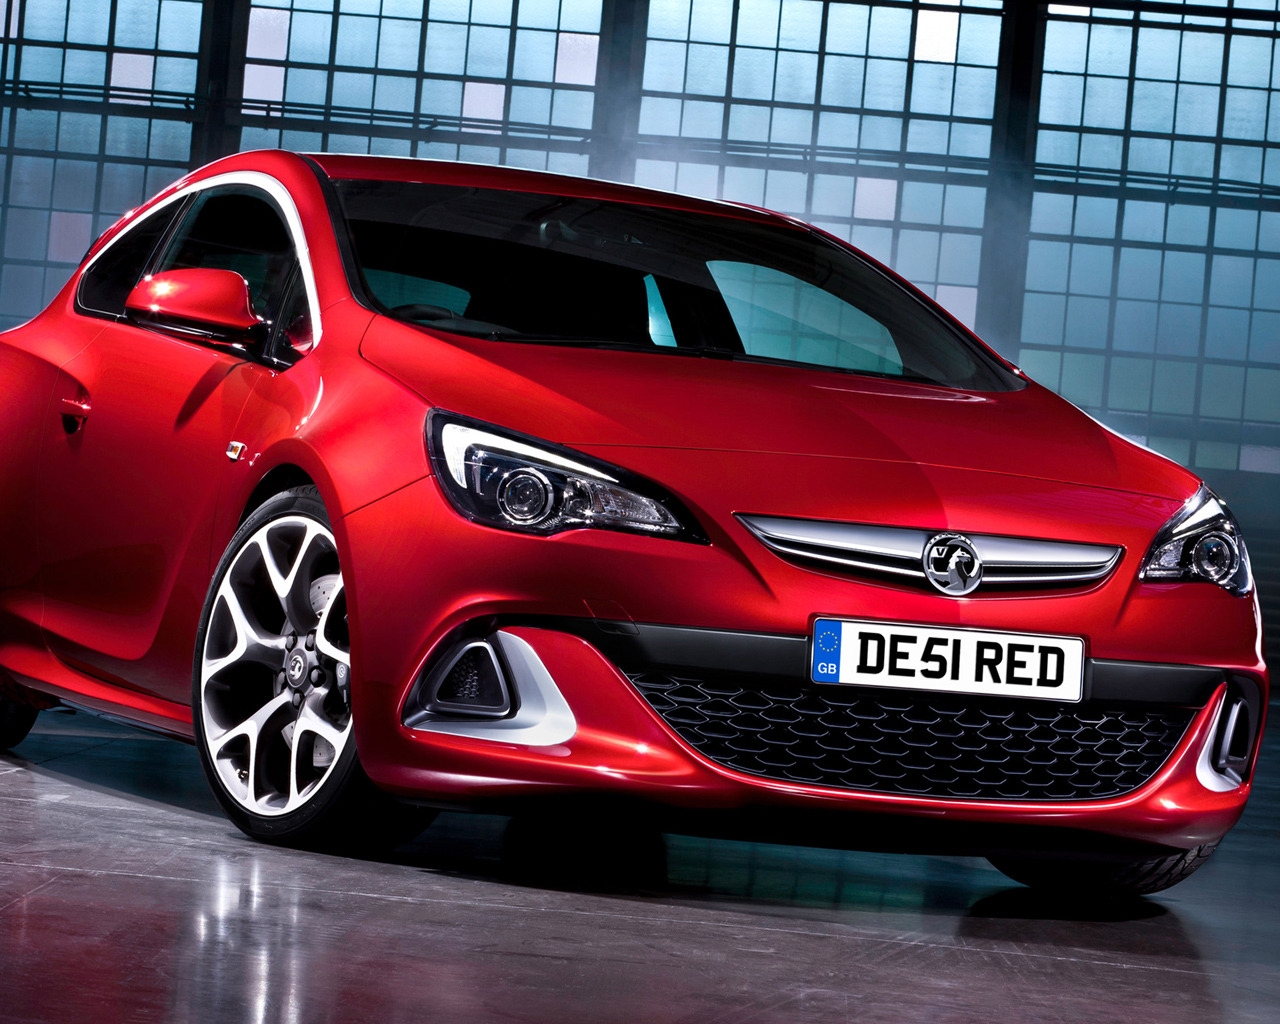 2012 Vauxhall Astra GTC for 1280 x 1024 resolution